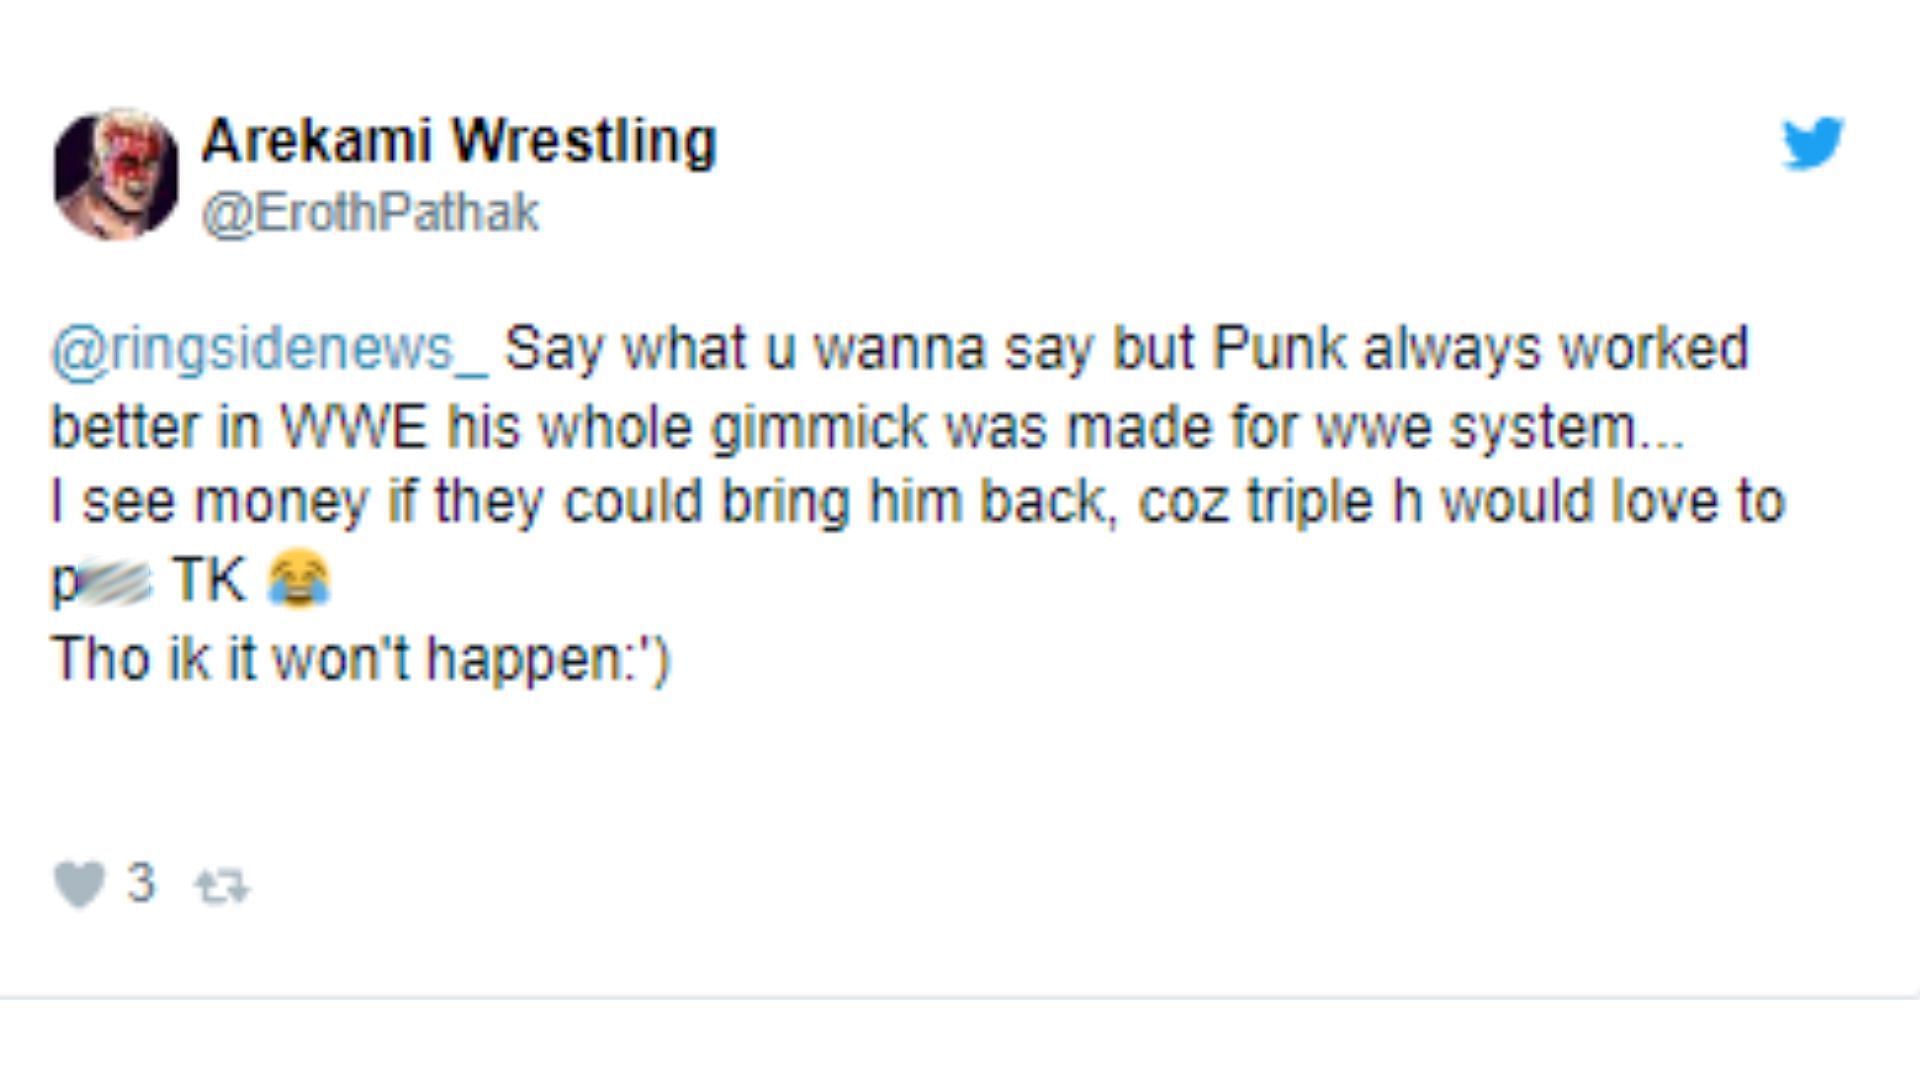 Did Punk&#039;s gimmick work better in WWE?